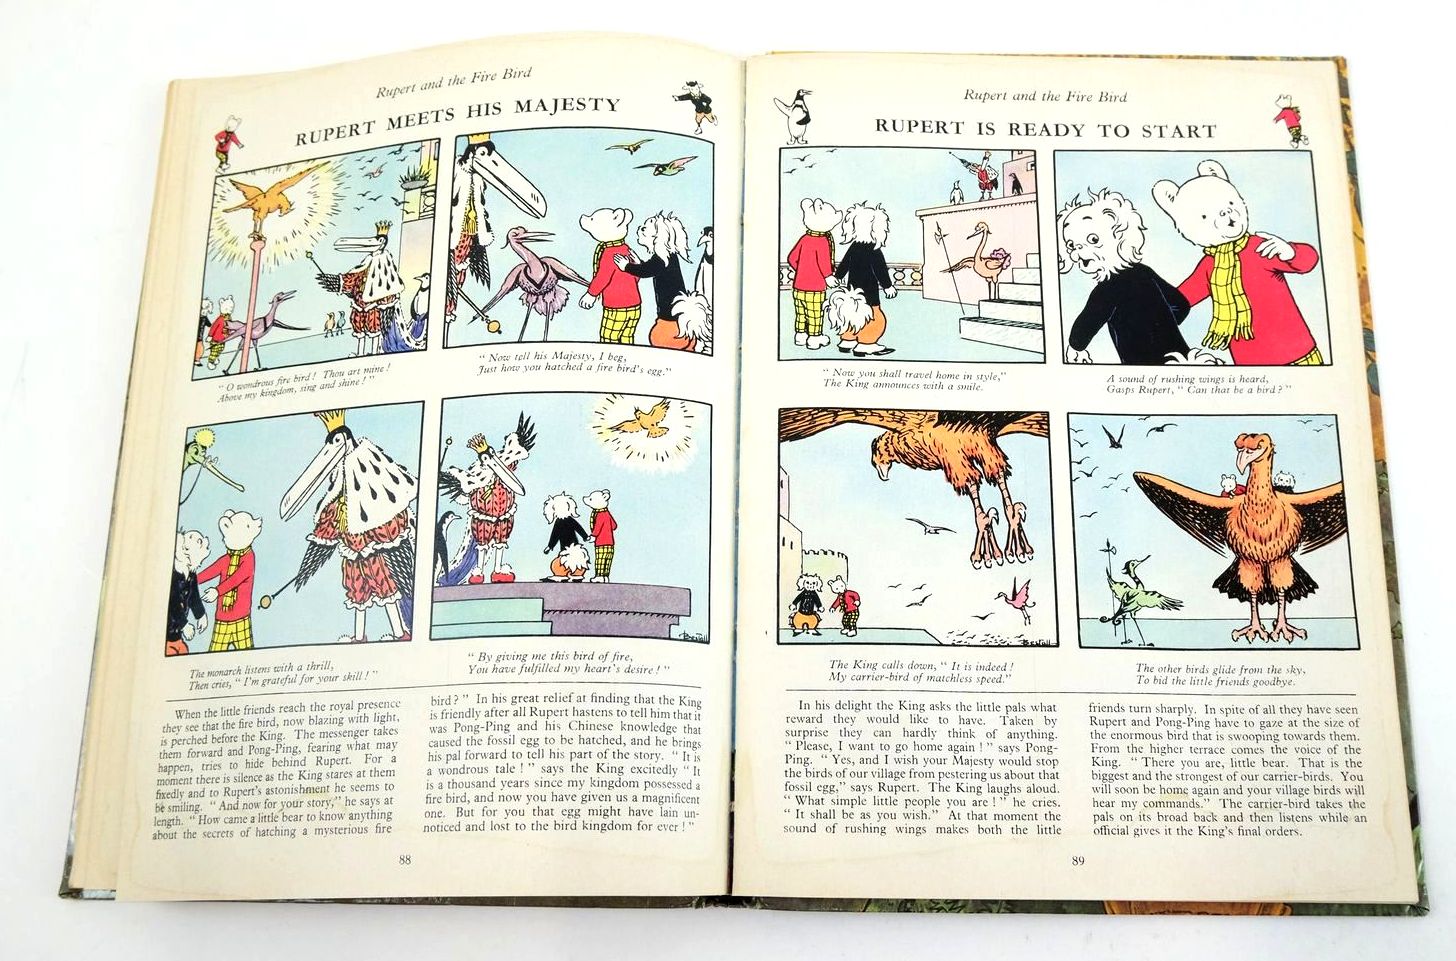 Photo of RUPERT ANNUAL 1968 written by Bestall, Alfred illustrated by Bestall, Alfred published by Daily Express (STOCK CODE: 1324993)  for sale by Stella & Rose's Books